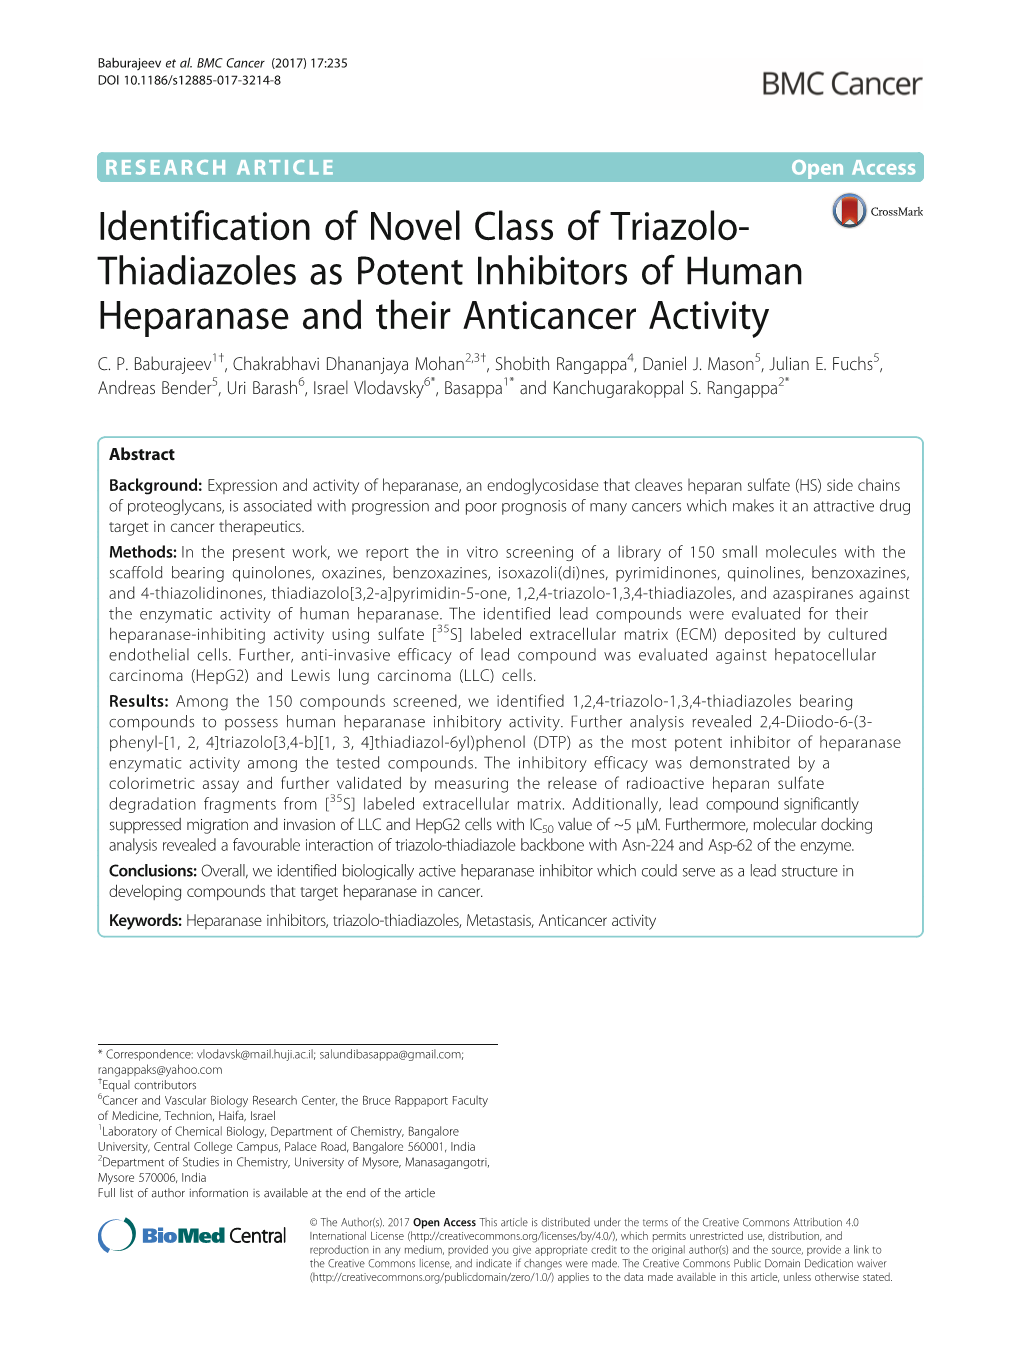 Thiadiazoles As Potent Inhibitors of Human Heparanase and Their Anticancer Activity C